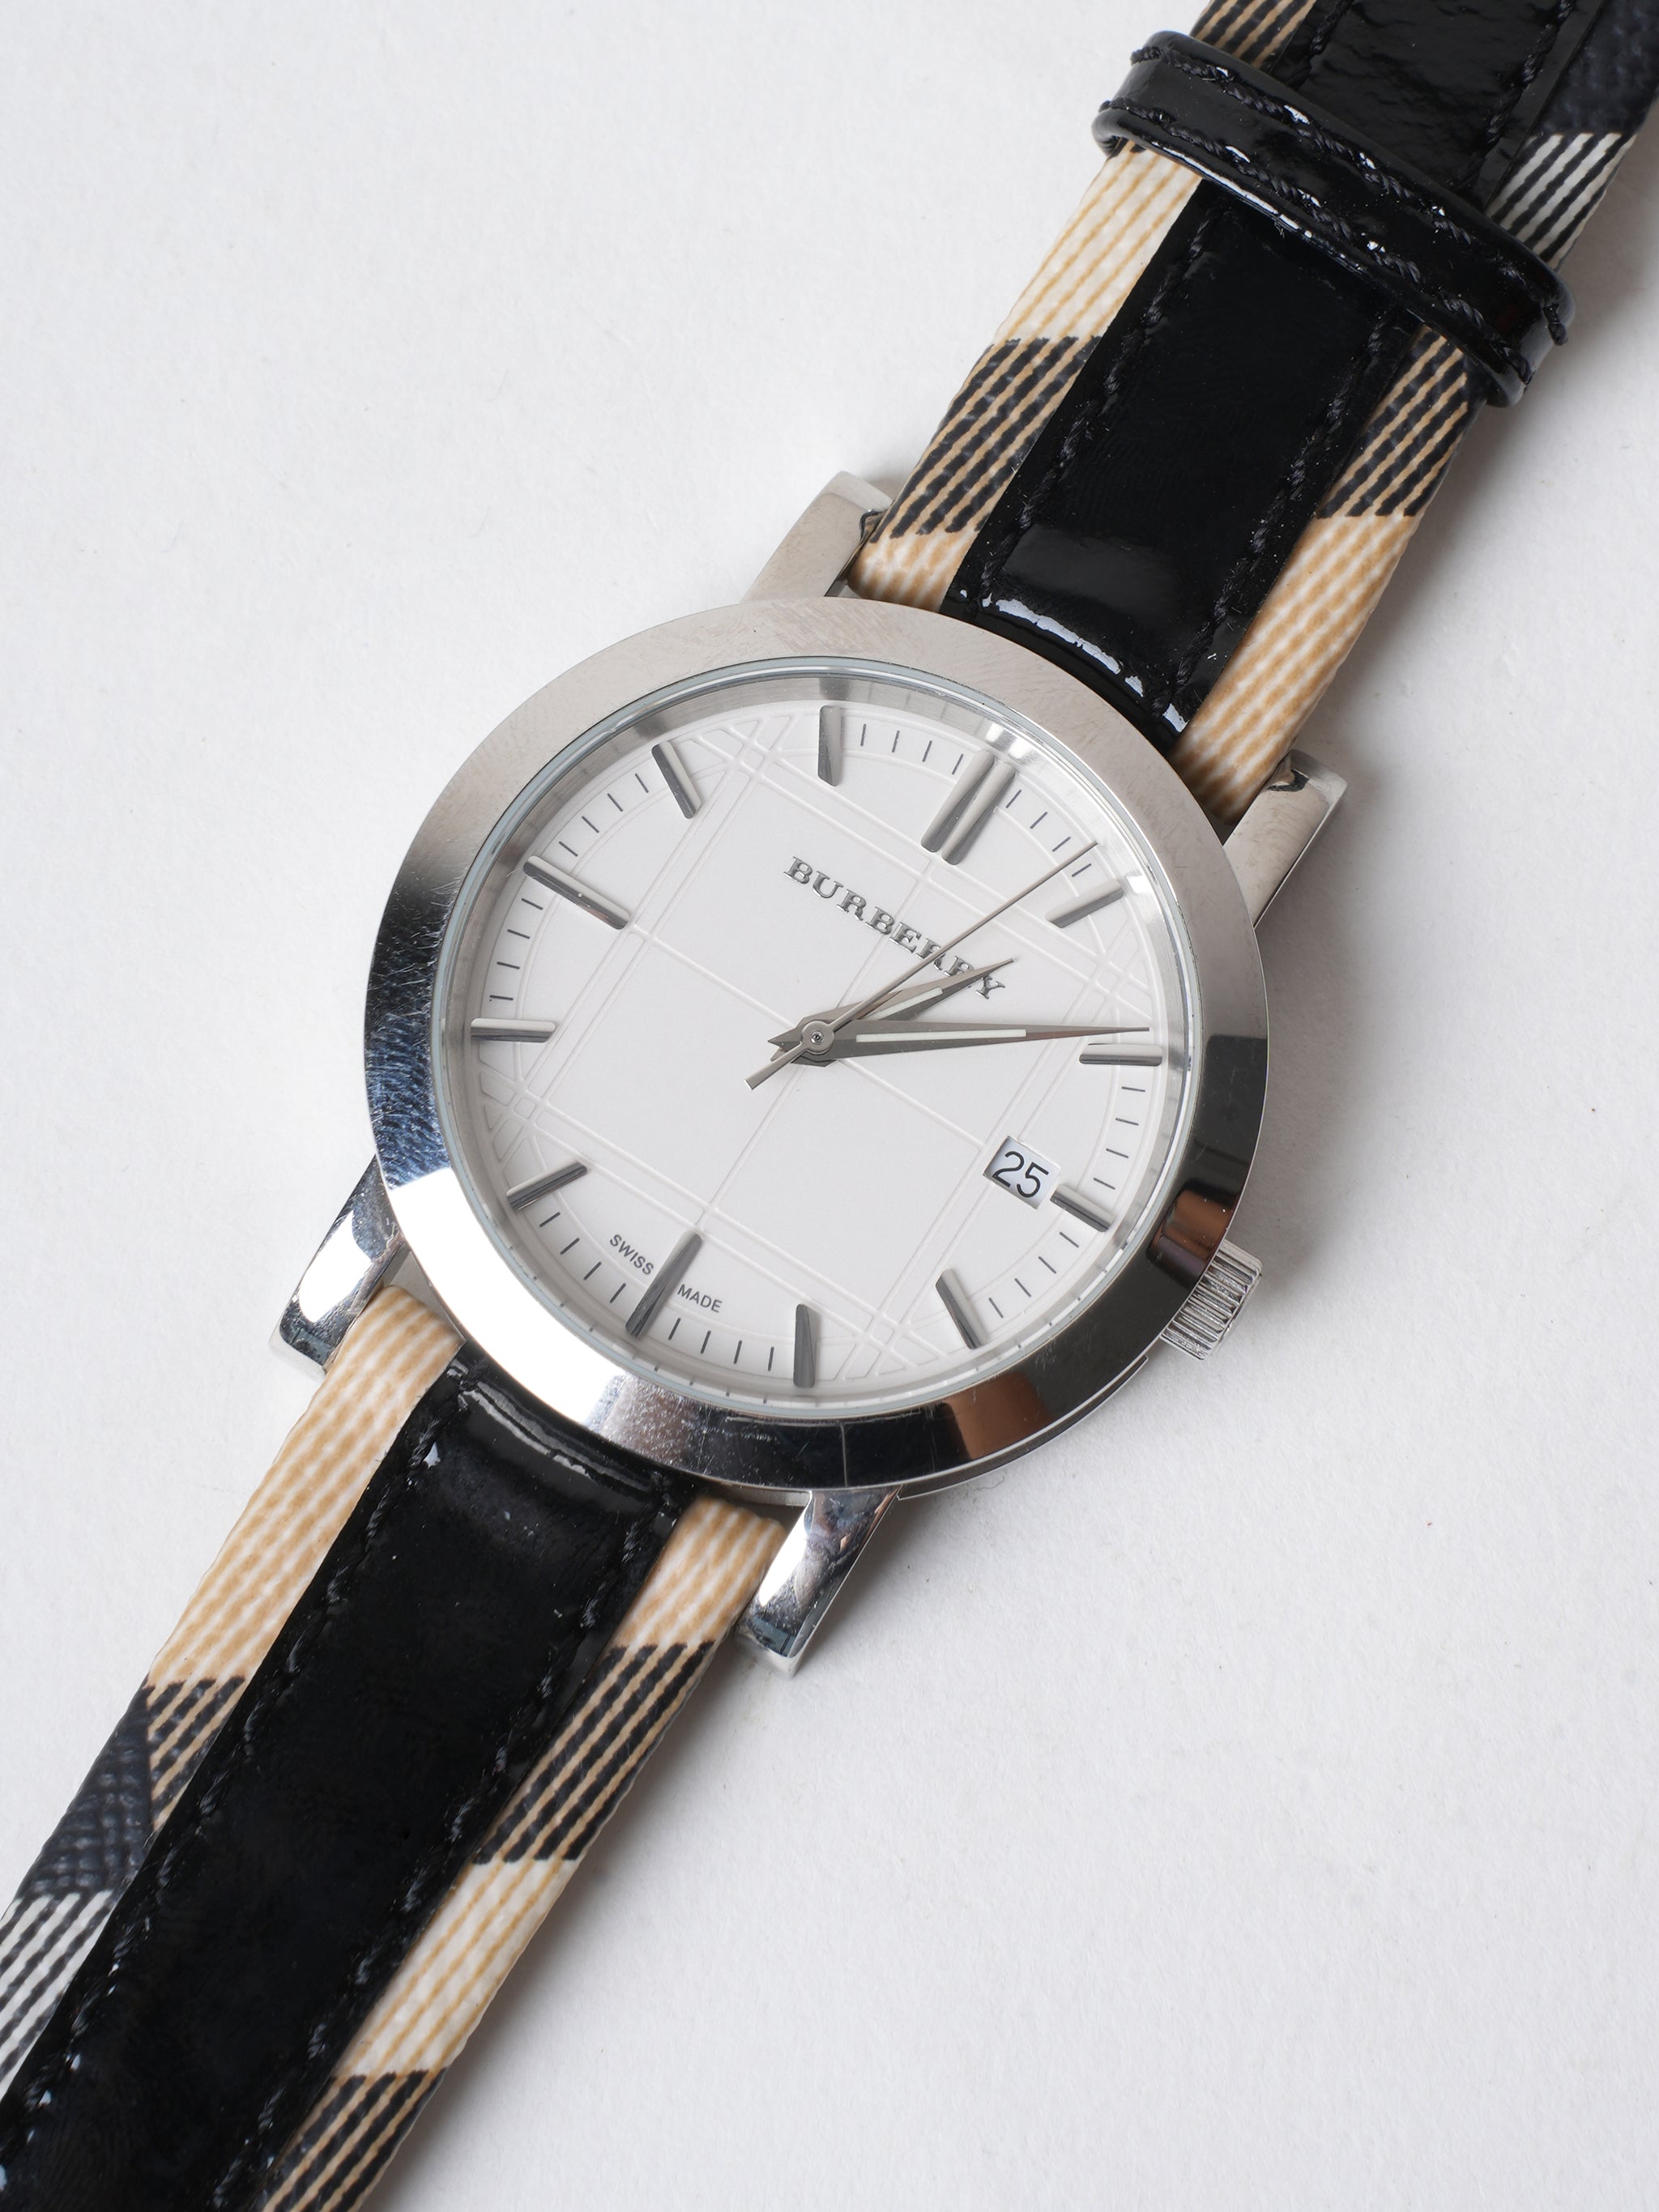 Burberry checkered Watch with Black Band